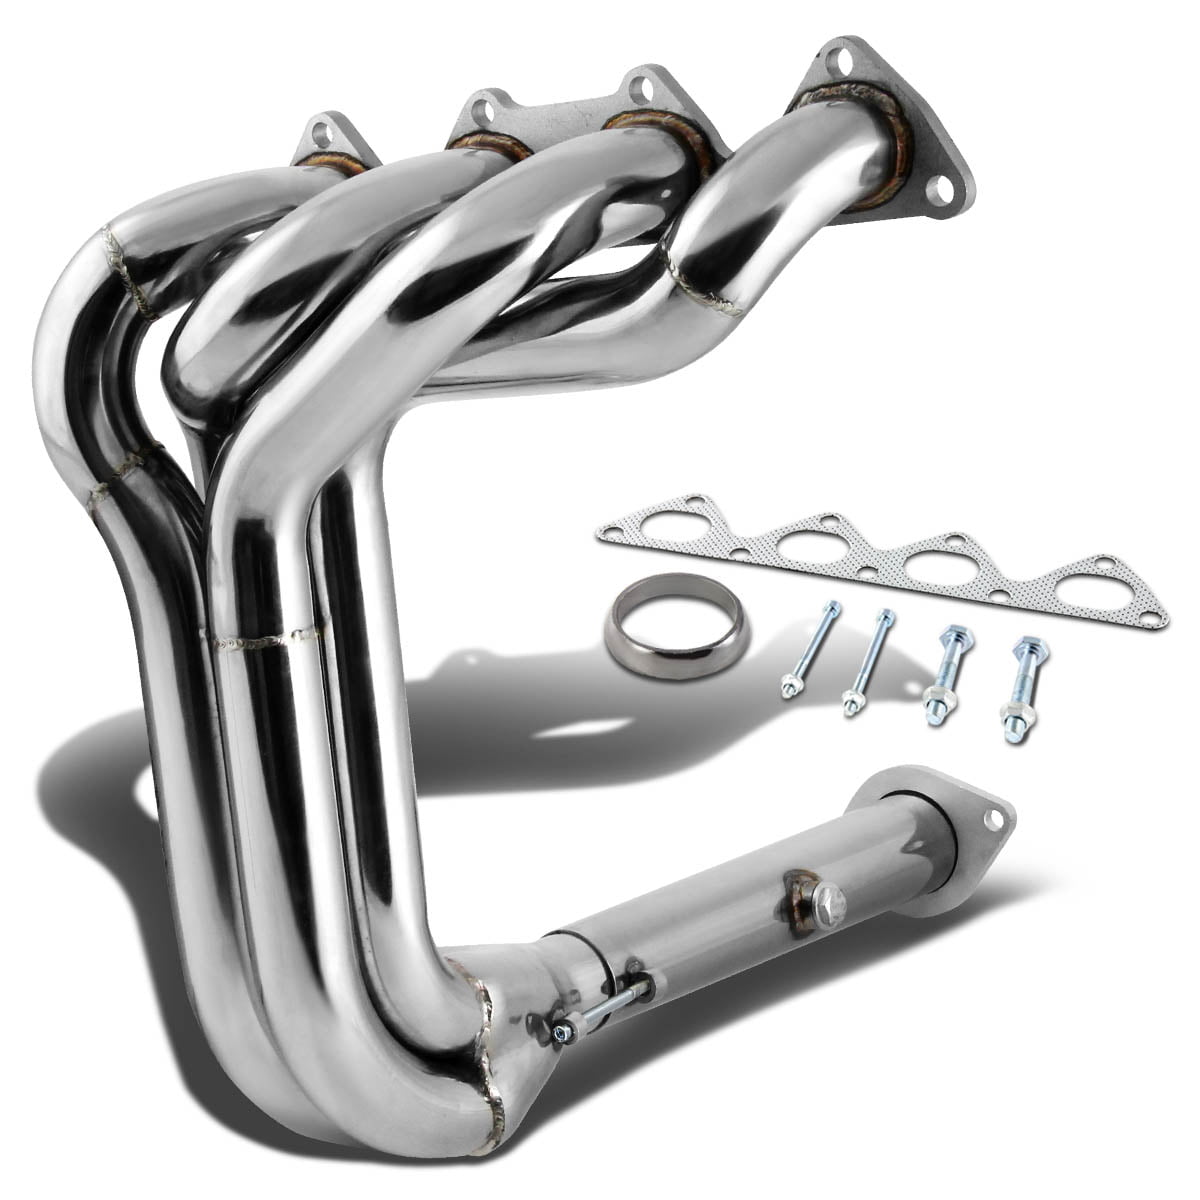 DNA MOTORING HDS-HC88 Stainless Steel 4-2-1 Exhaust Header for D-Series 